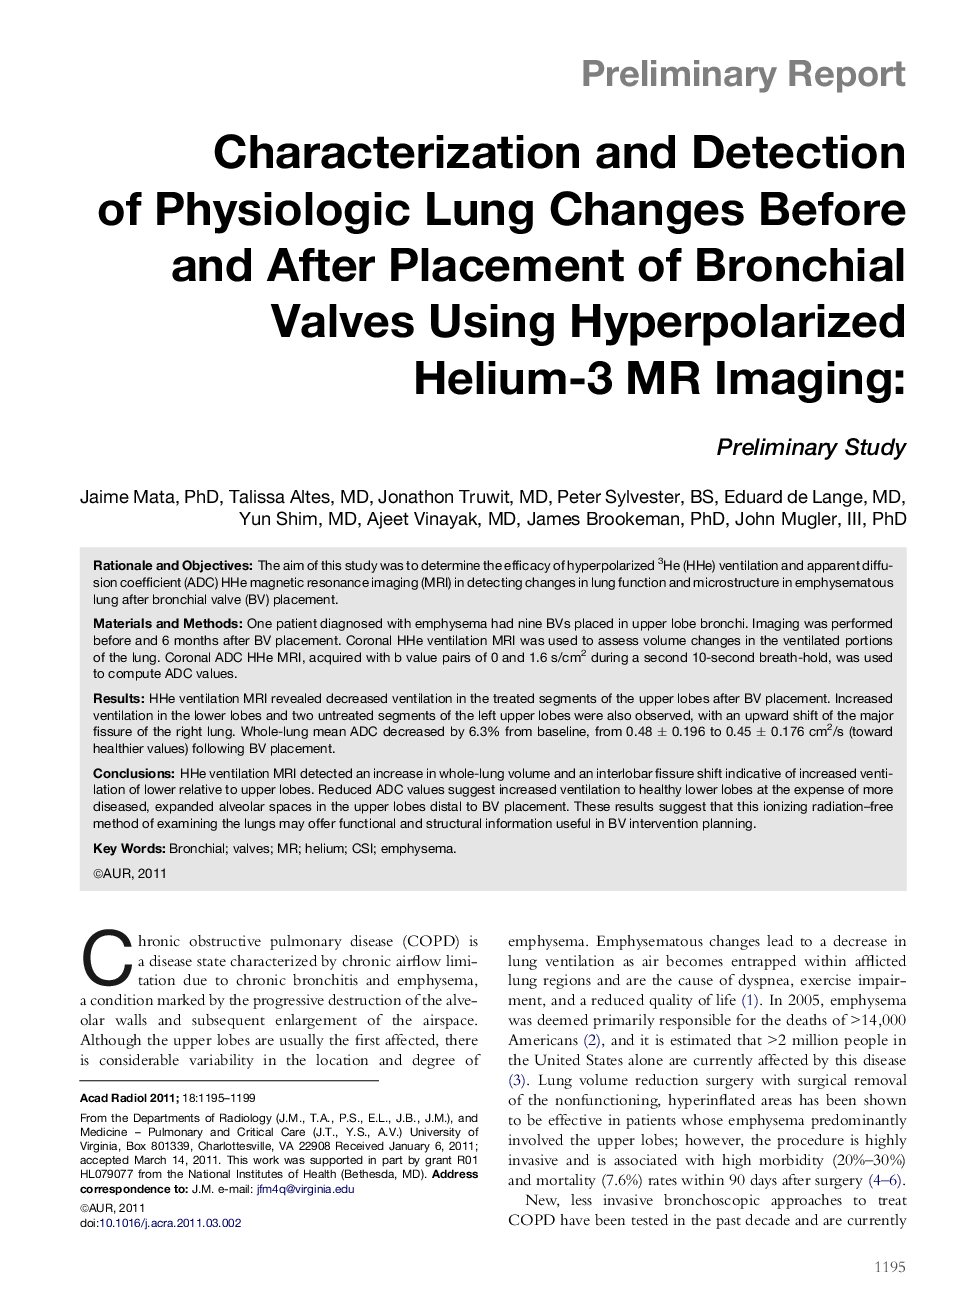 Characterization and Detection of Physiologic Lung Changes Before and After Placement of Bronchial Valves Using Hyperpolarized Helium-3 MR Imaging